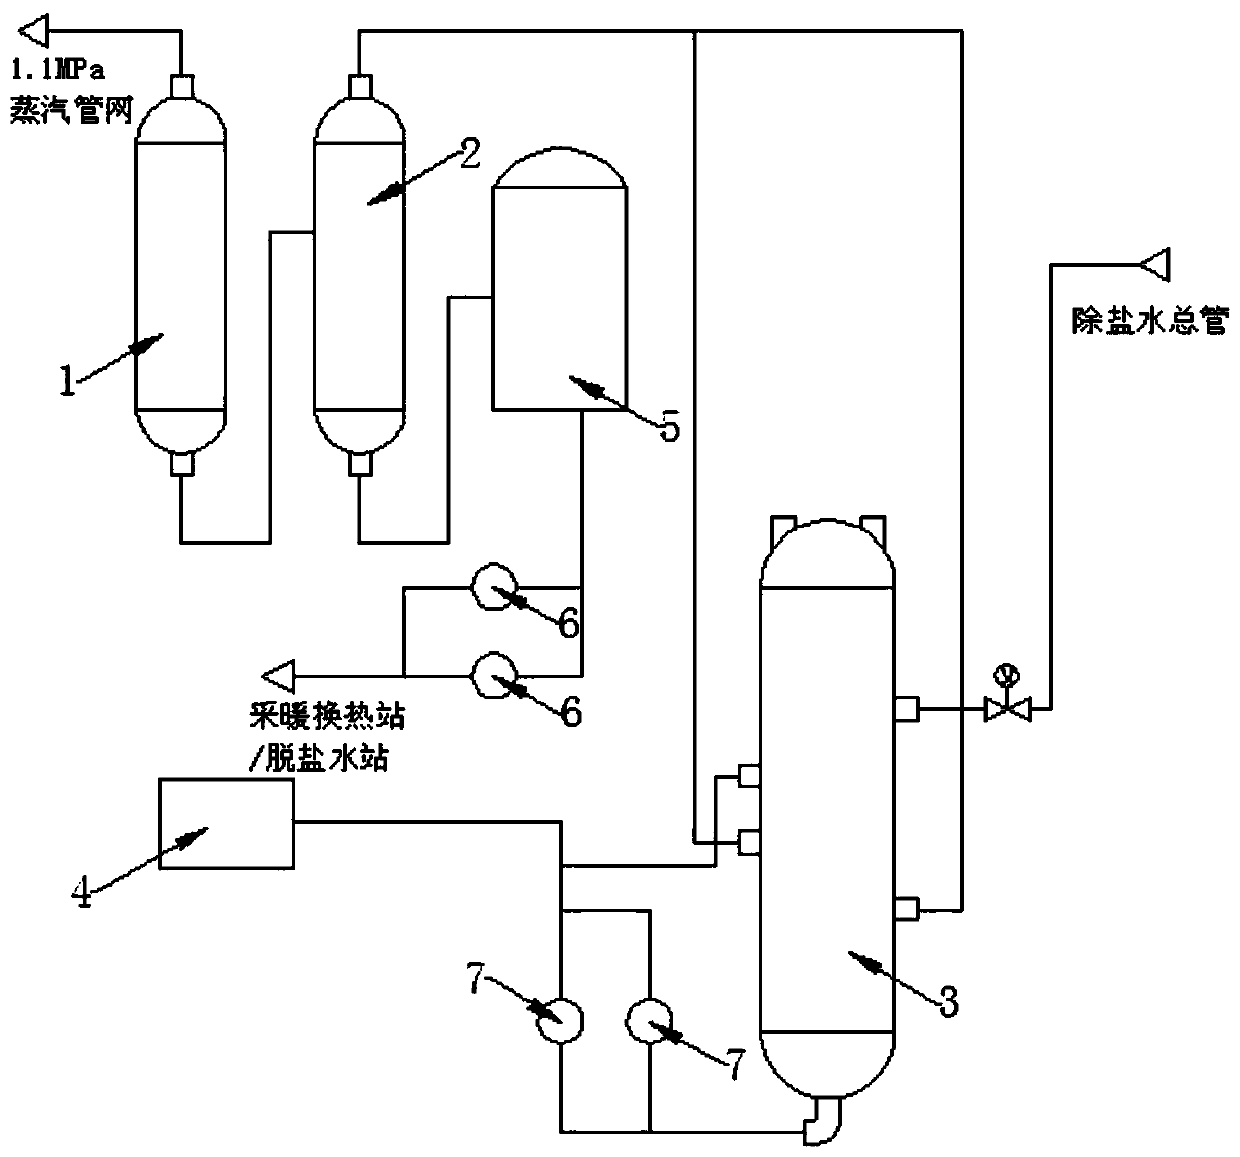 Boiler blowdown recycling method and device